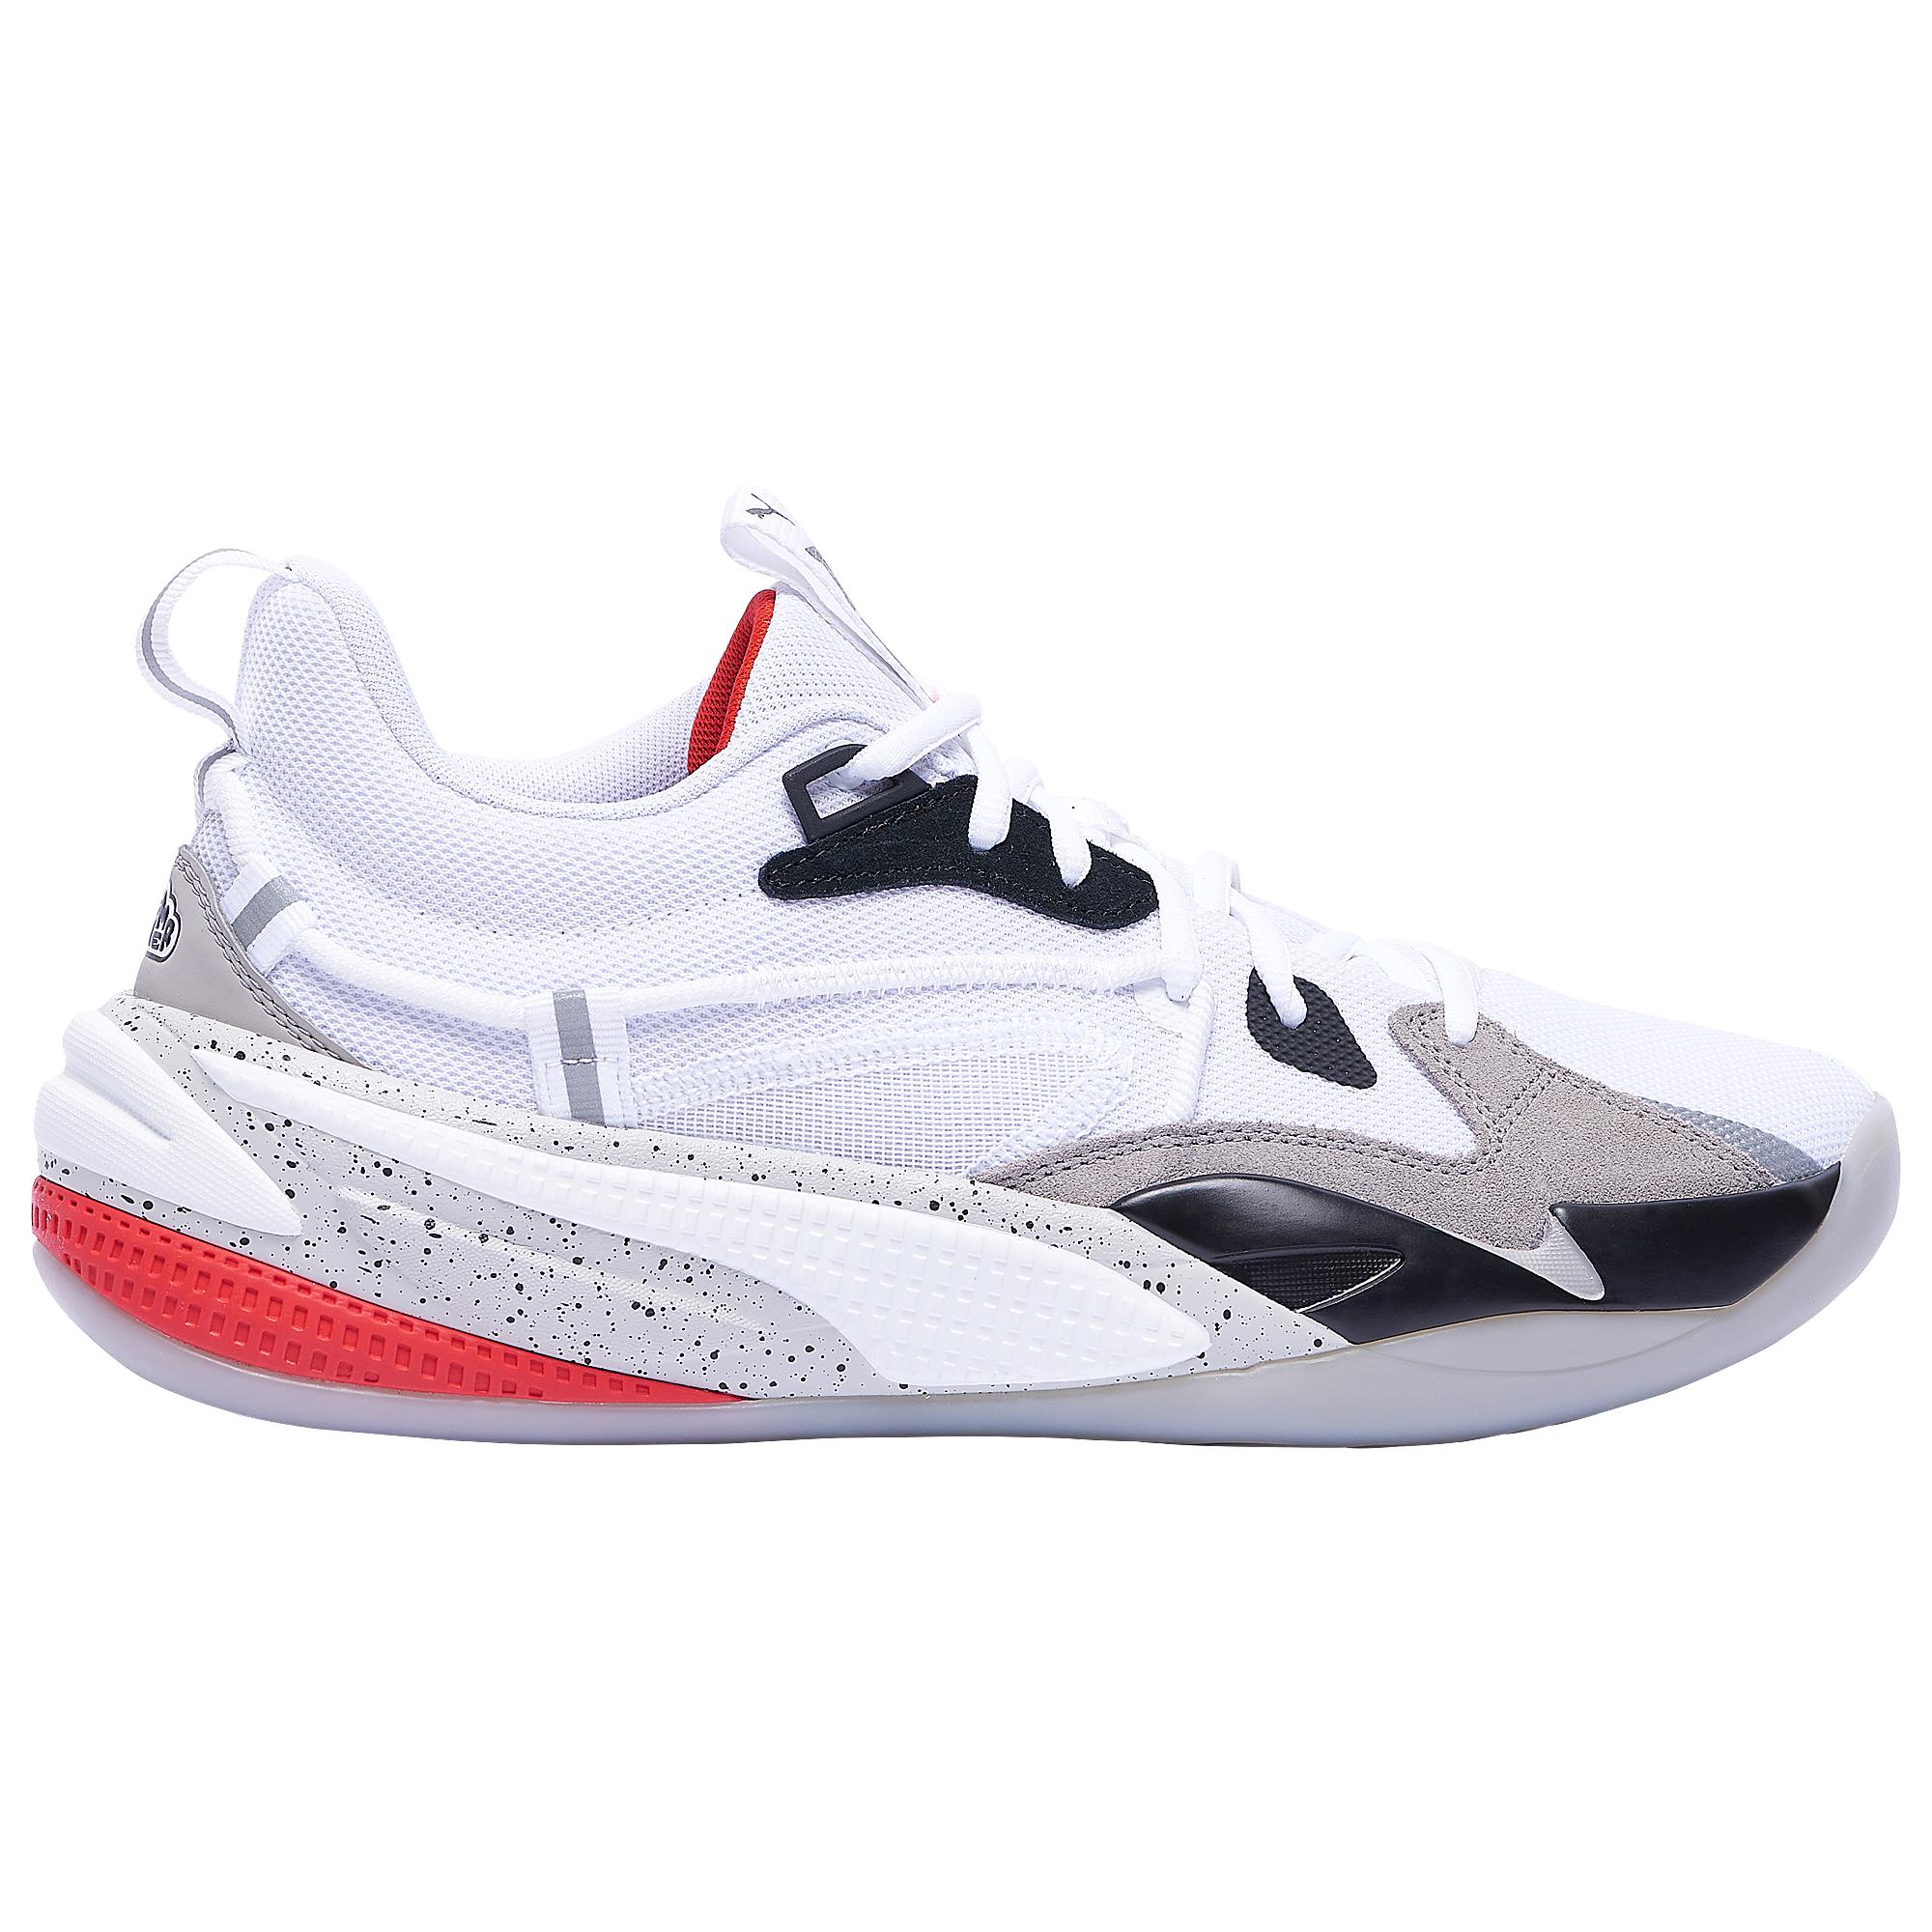 PUMA Rs Dreamer - Basketball Shoes in White/Black/Red (White) for Men ...